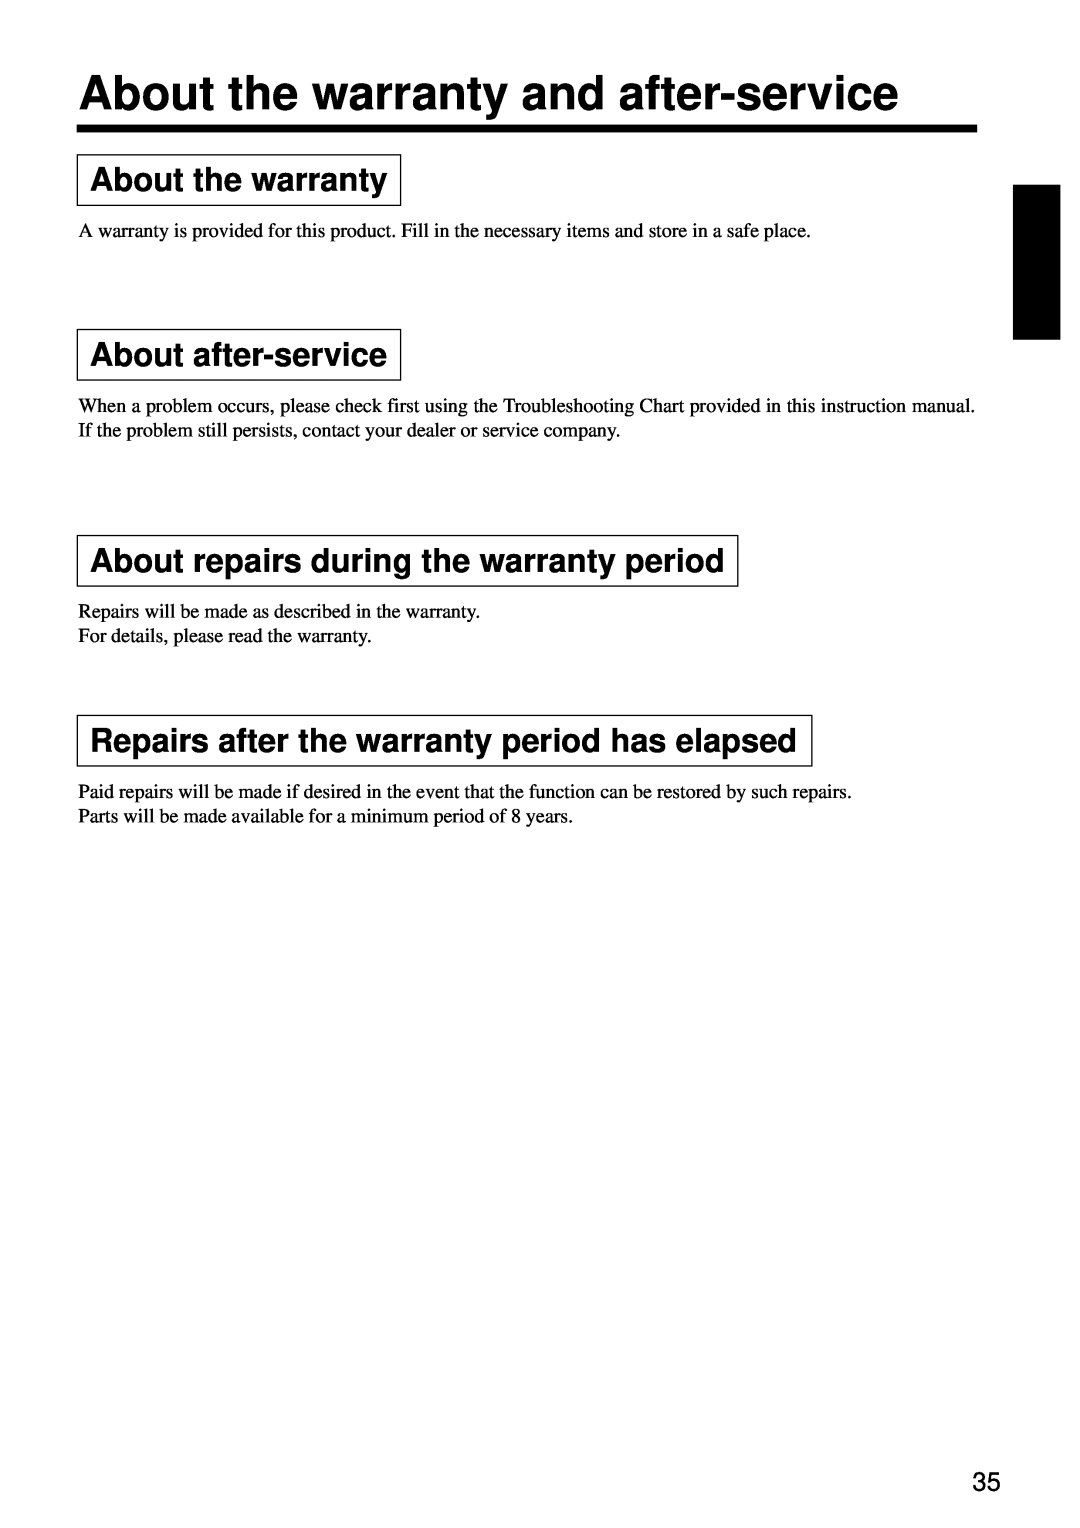 Hitachi CP-X960W About the warranty and after-service, About after-service, About repairs during the warranty period 